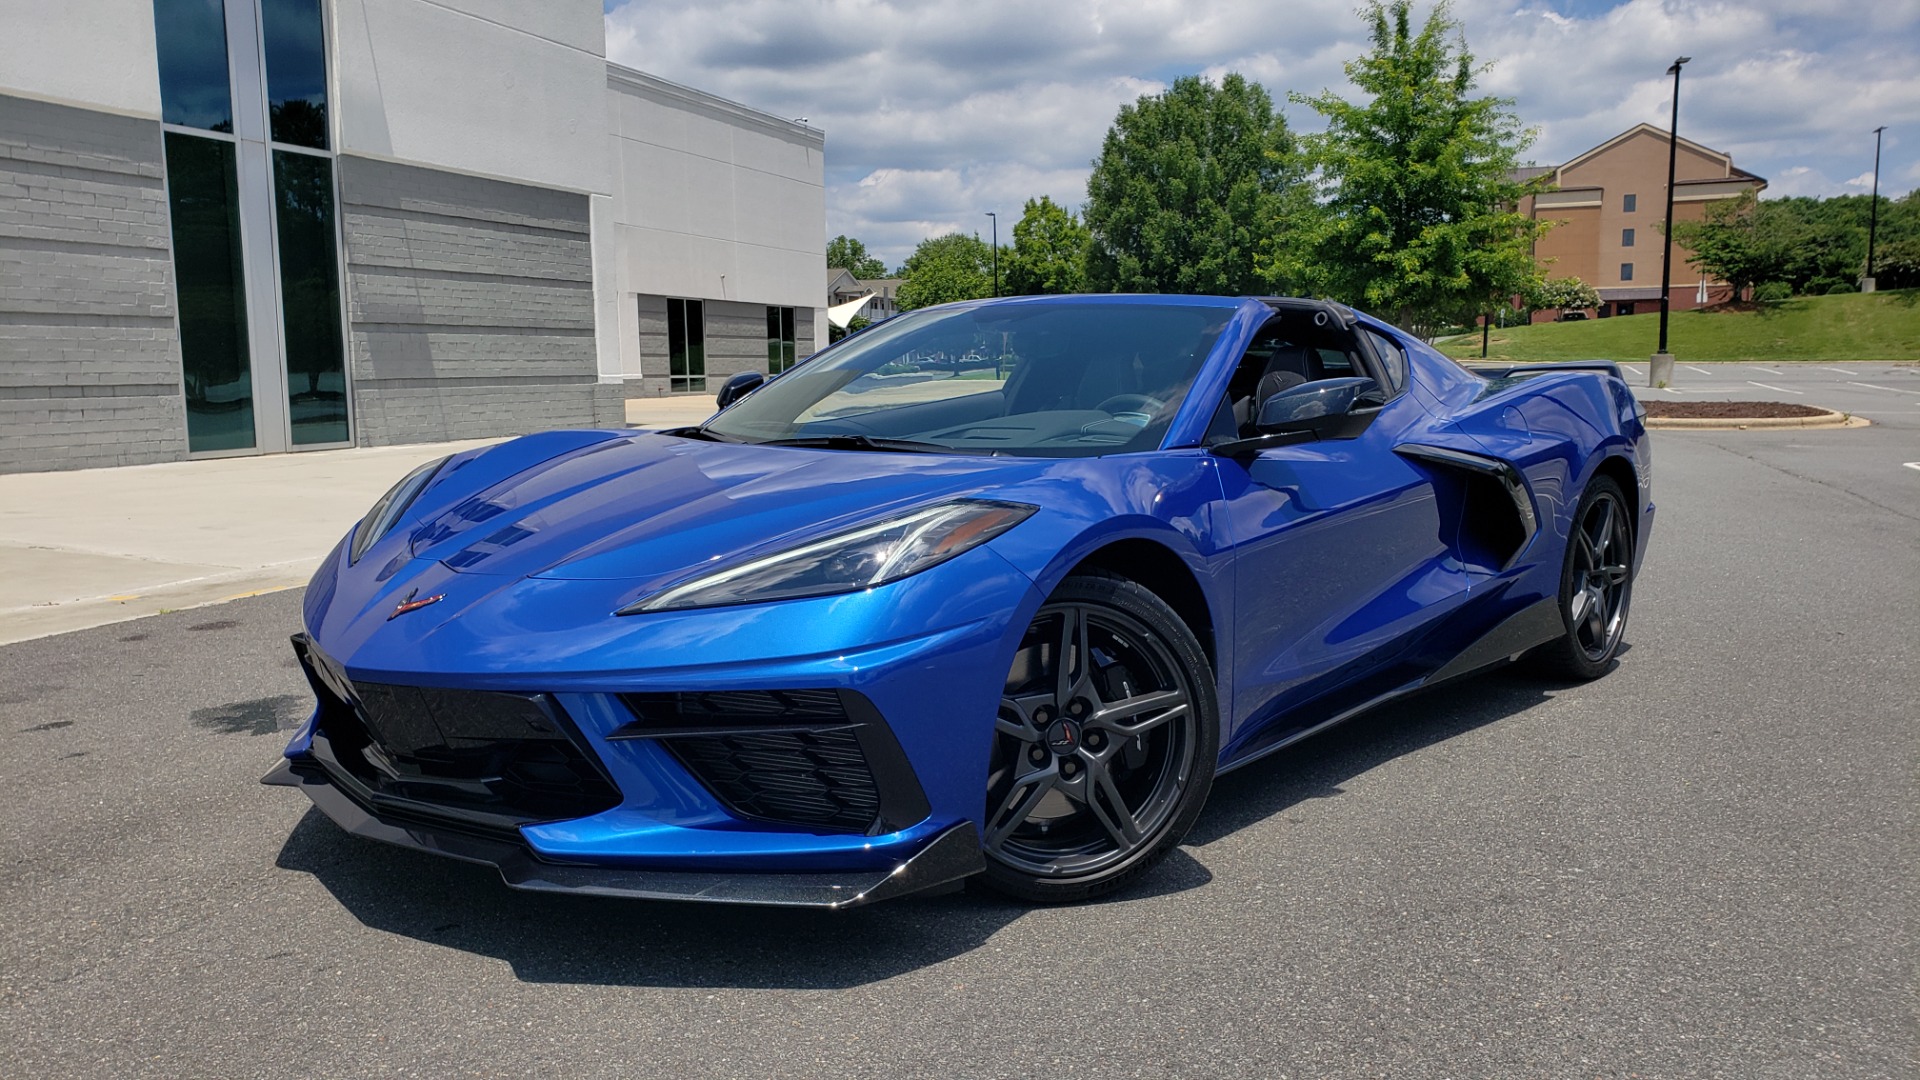 Used 2020 Chevrolet CORVETTE C8 STINGRAY COUPE 2LT / PERF & Z51 PKG / NAV / BOSE / 8-SPD AUTO / REARVIEW for sale Sold at Formula Imports in Charlotte NC 28227 12